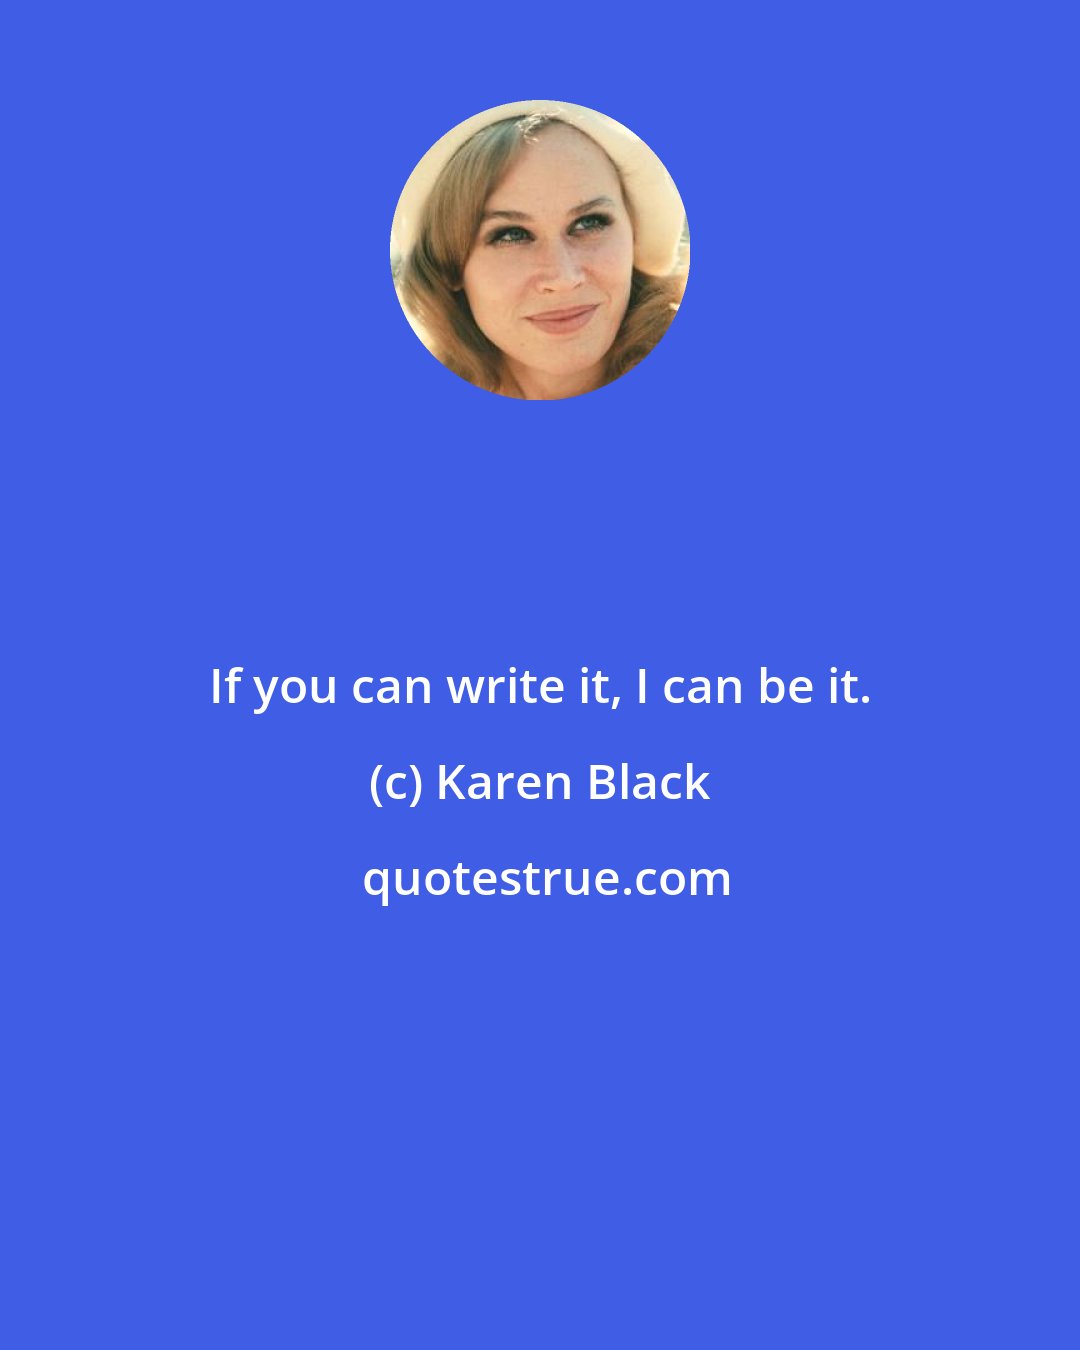 Karen Black: If you can write it, I can be it.